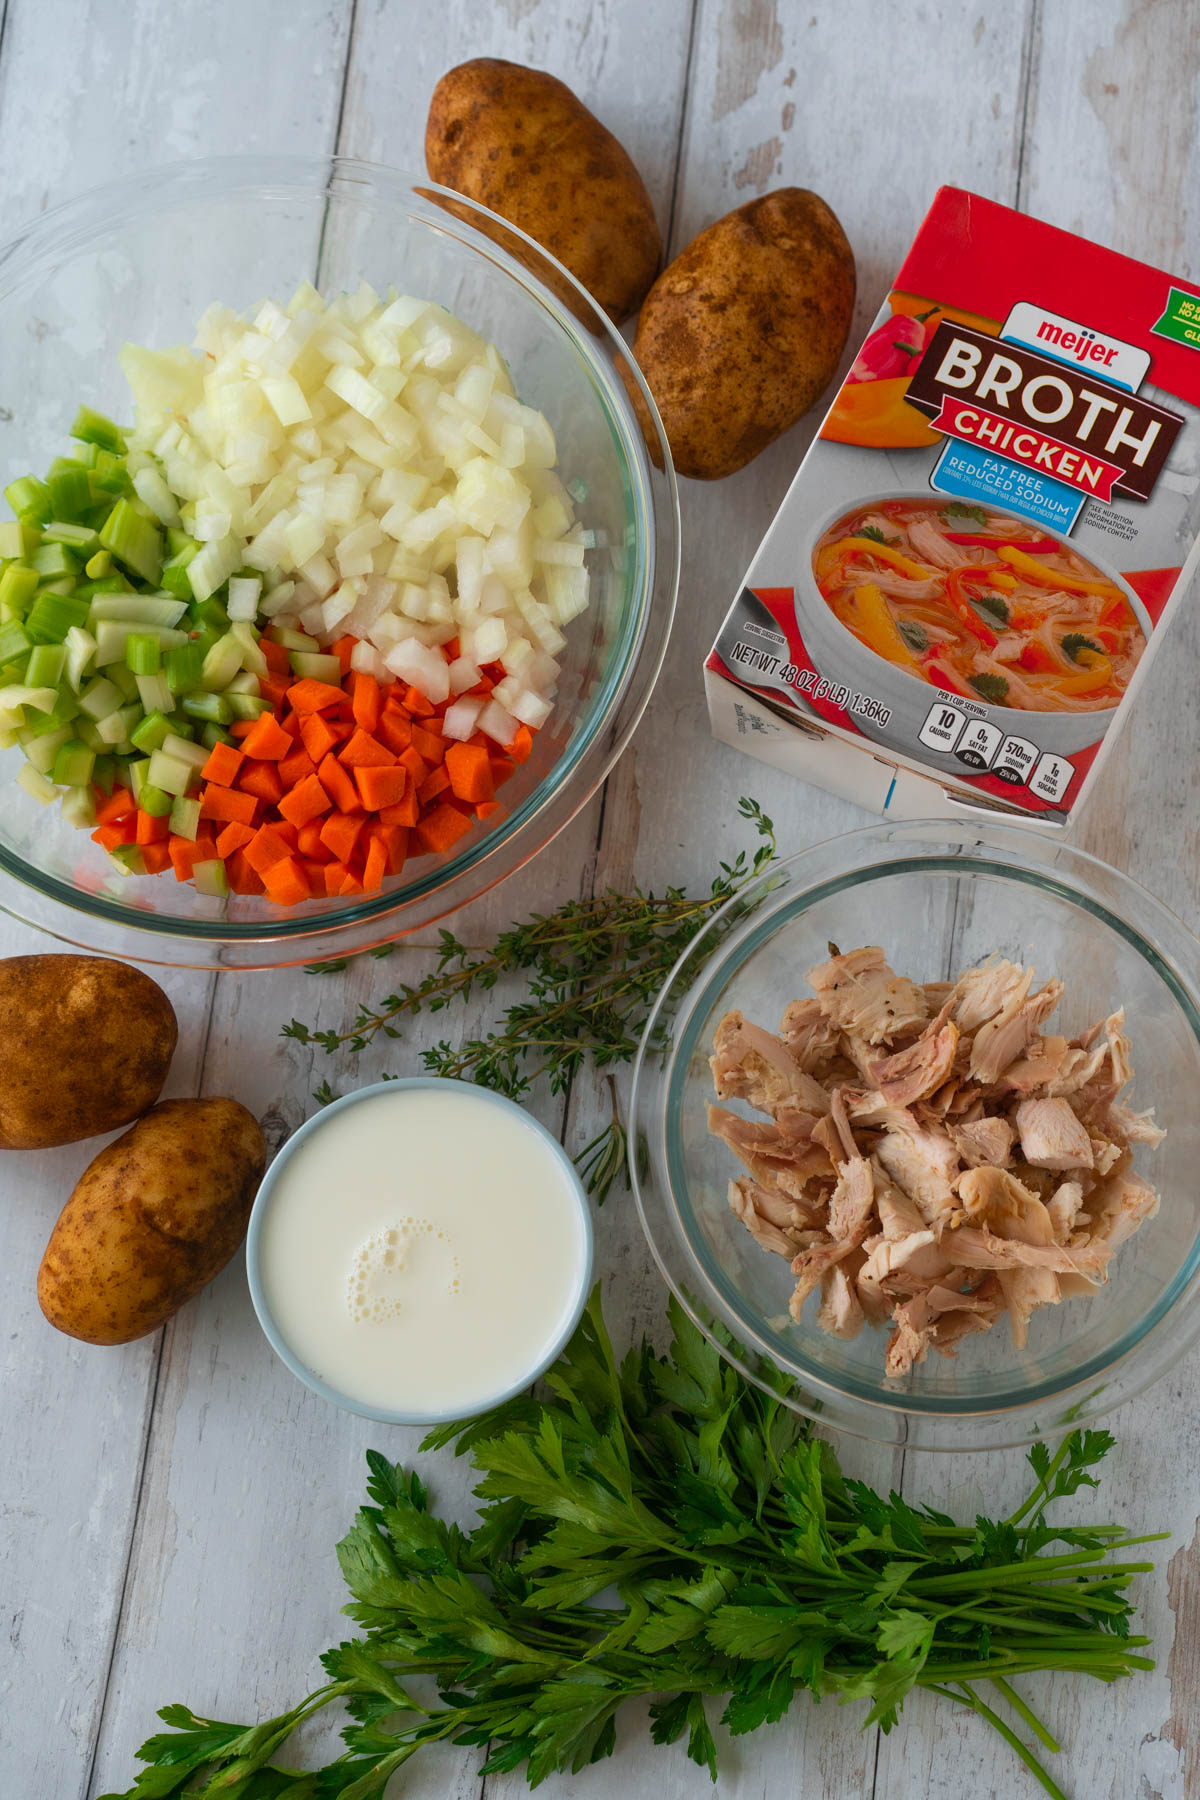 Top-down view of turkey and potato soup ingredients. From left to right - large, clear glass bowl of diced celery, onions, and carrots; four small russet potatoes; a cup of milk; fresh thyme, parsley, and rosemary; a small, clear glass bowl of shredded turkey; and a 48 oz carton of chicken broth